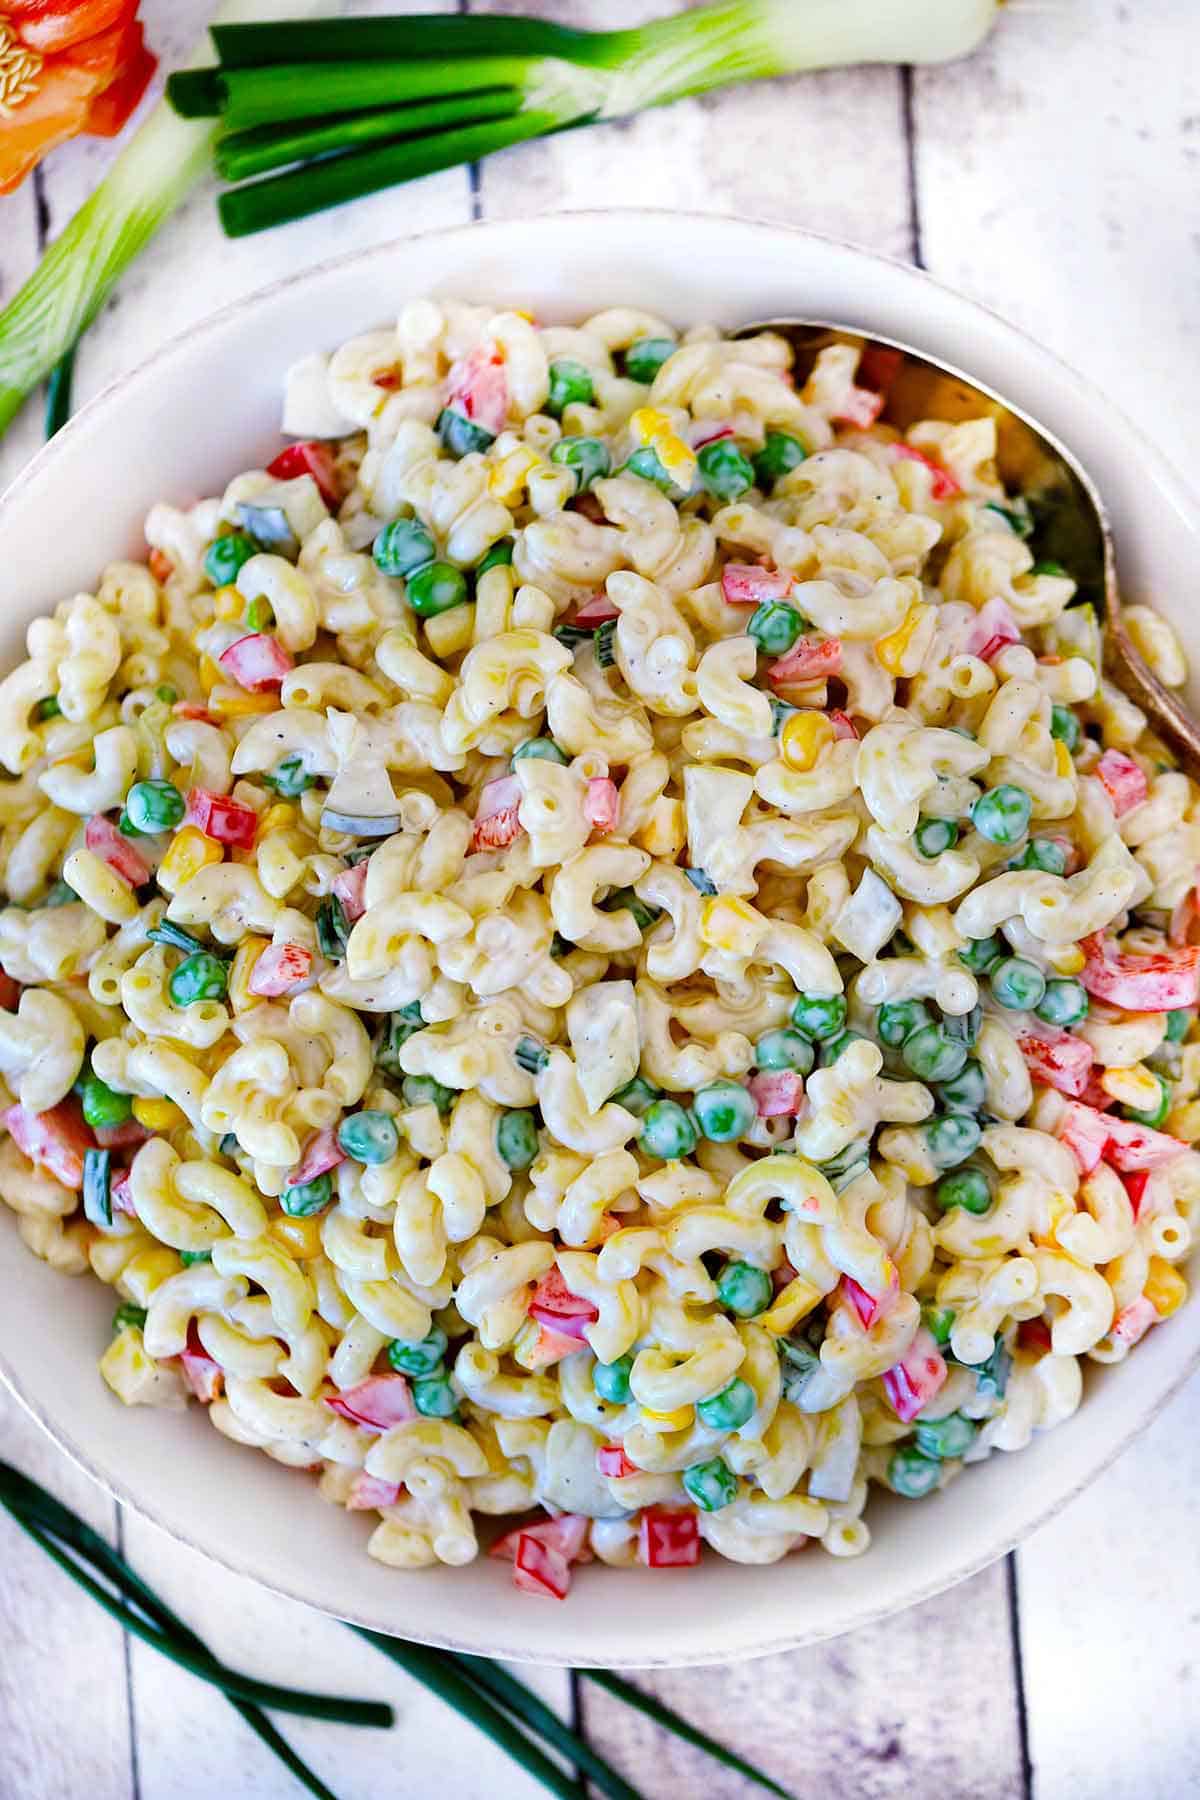 Overhead photo of macaroni salad with vegetables in a white bowl.